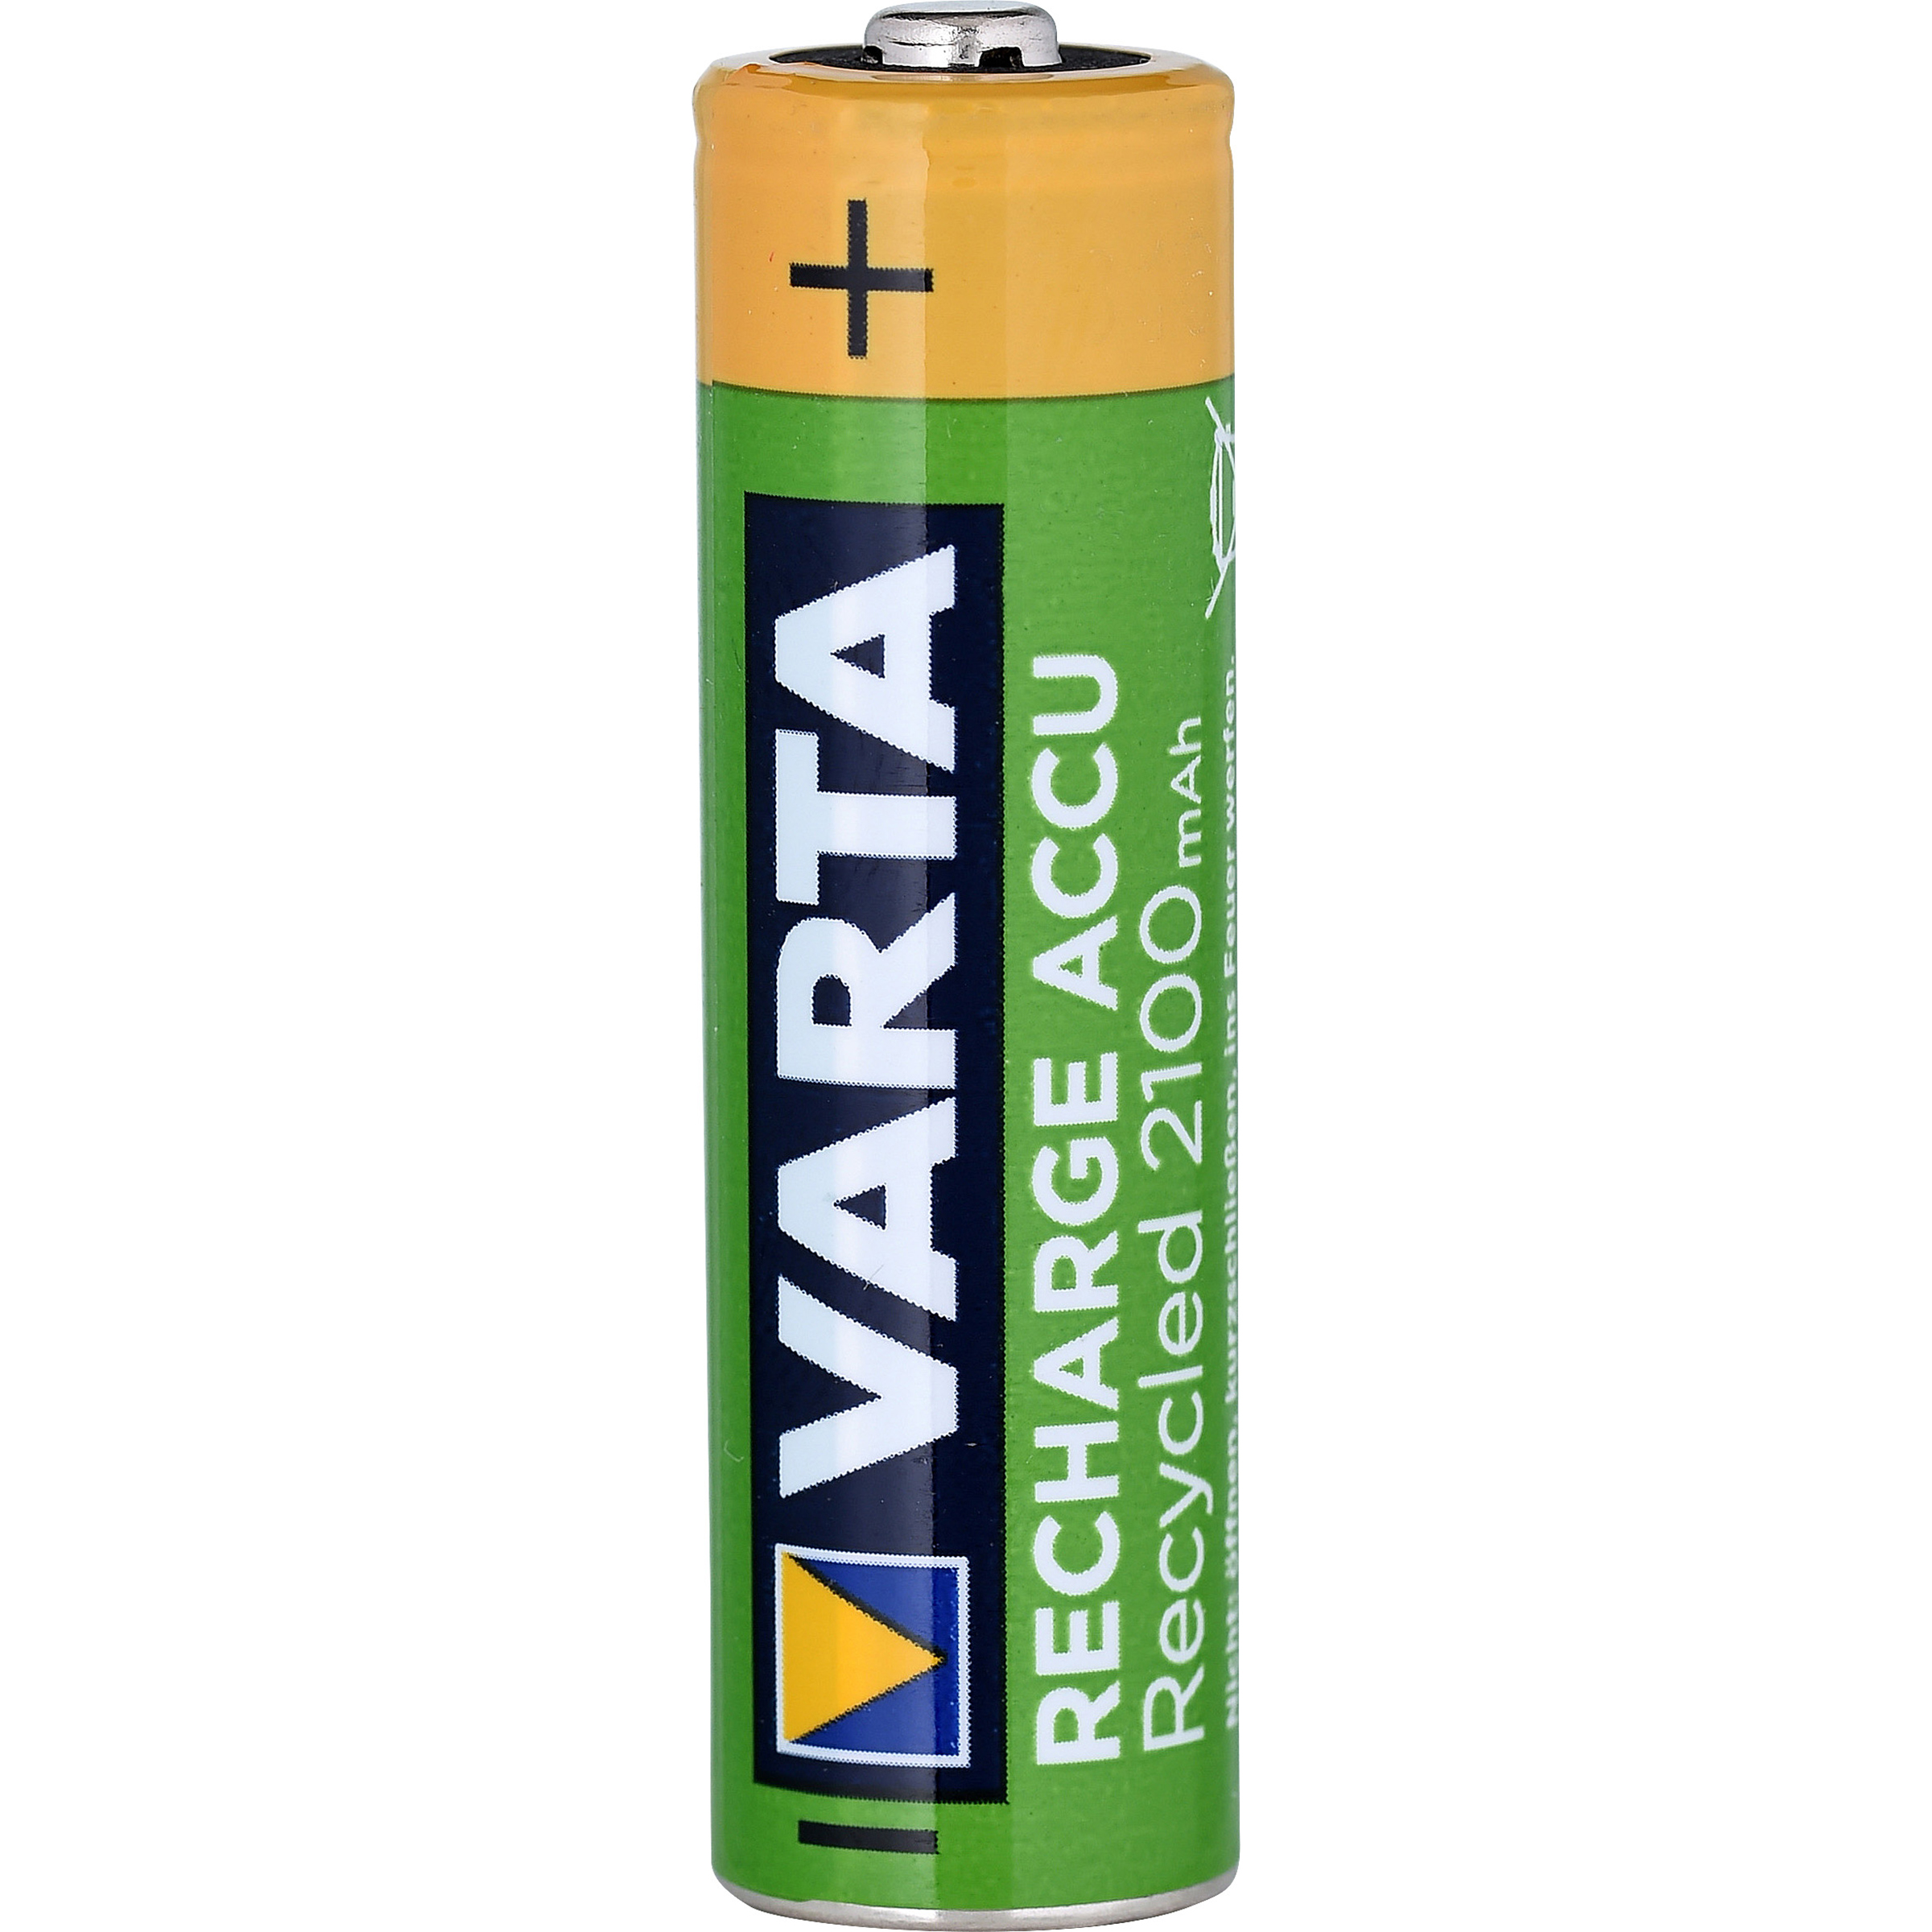 Test Varta AA Recharge Accu Recycled 2100 - Pile - UFC-Que Choisir